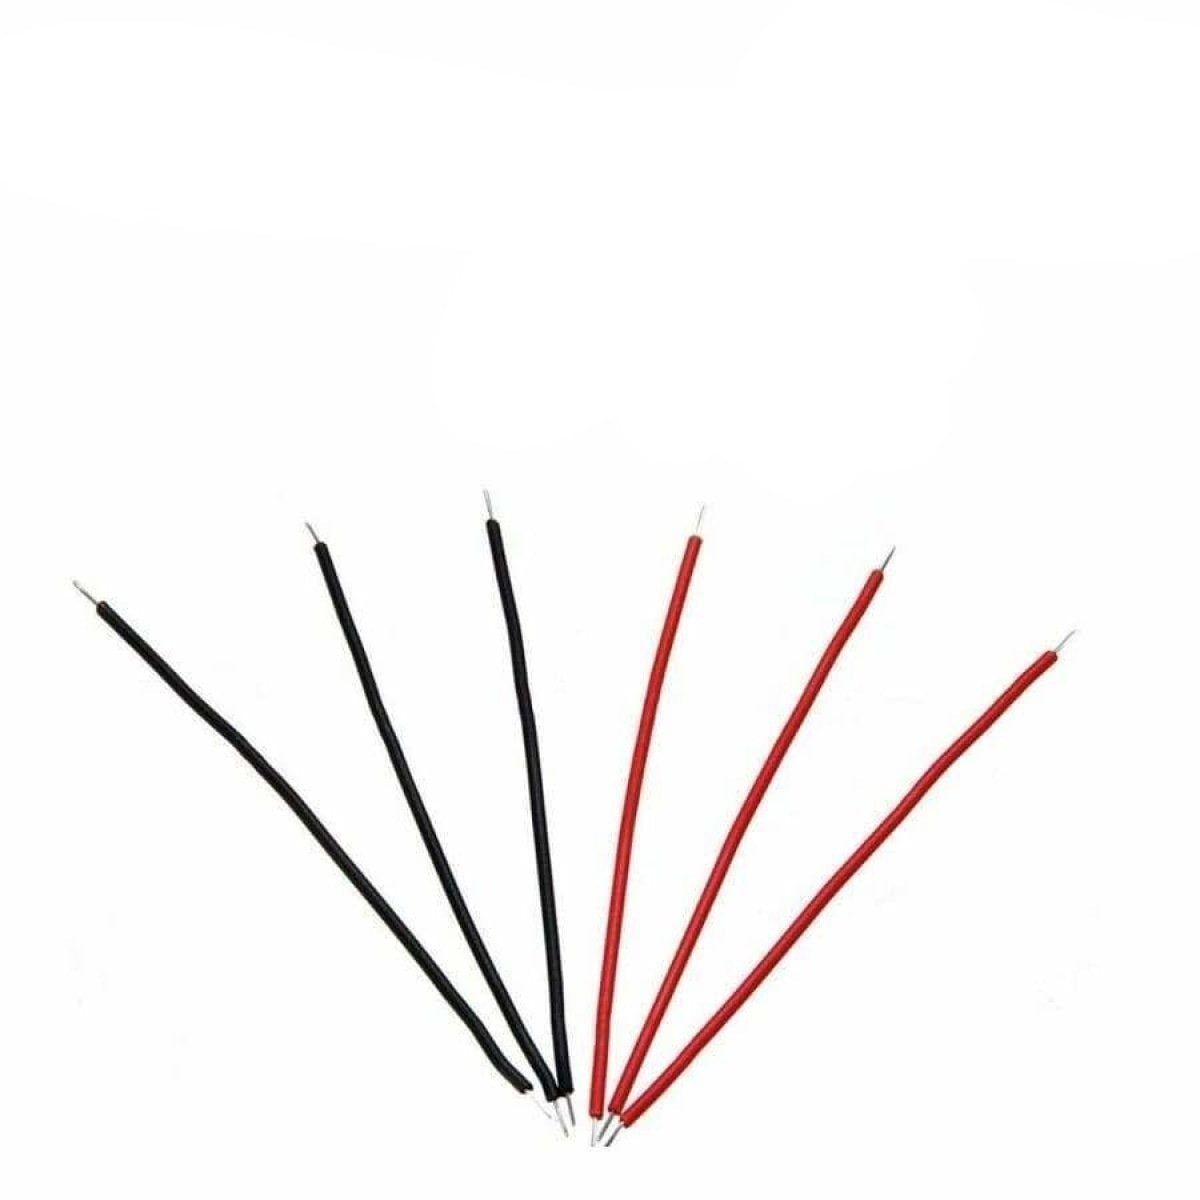 400pcs 6cm Breadboard Jumper Cable Wire Black & Red Tin-Plated| Asia Sell